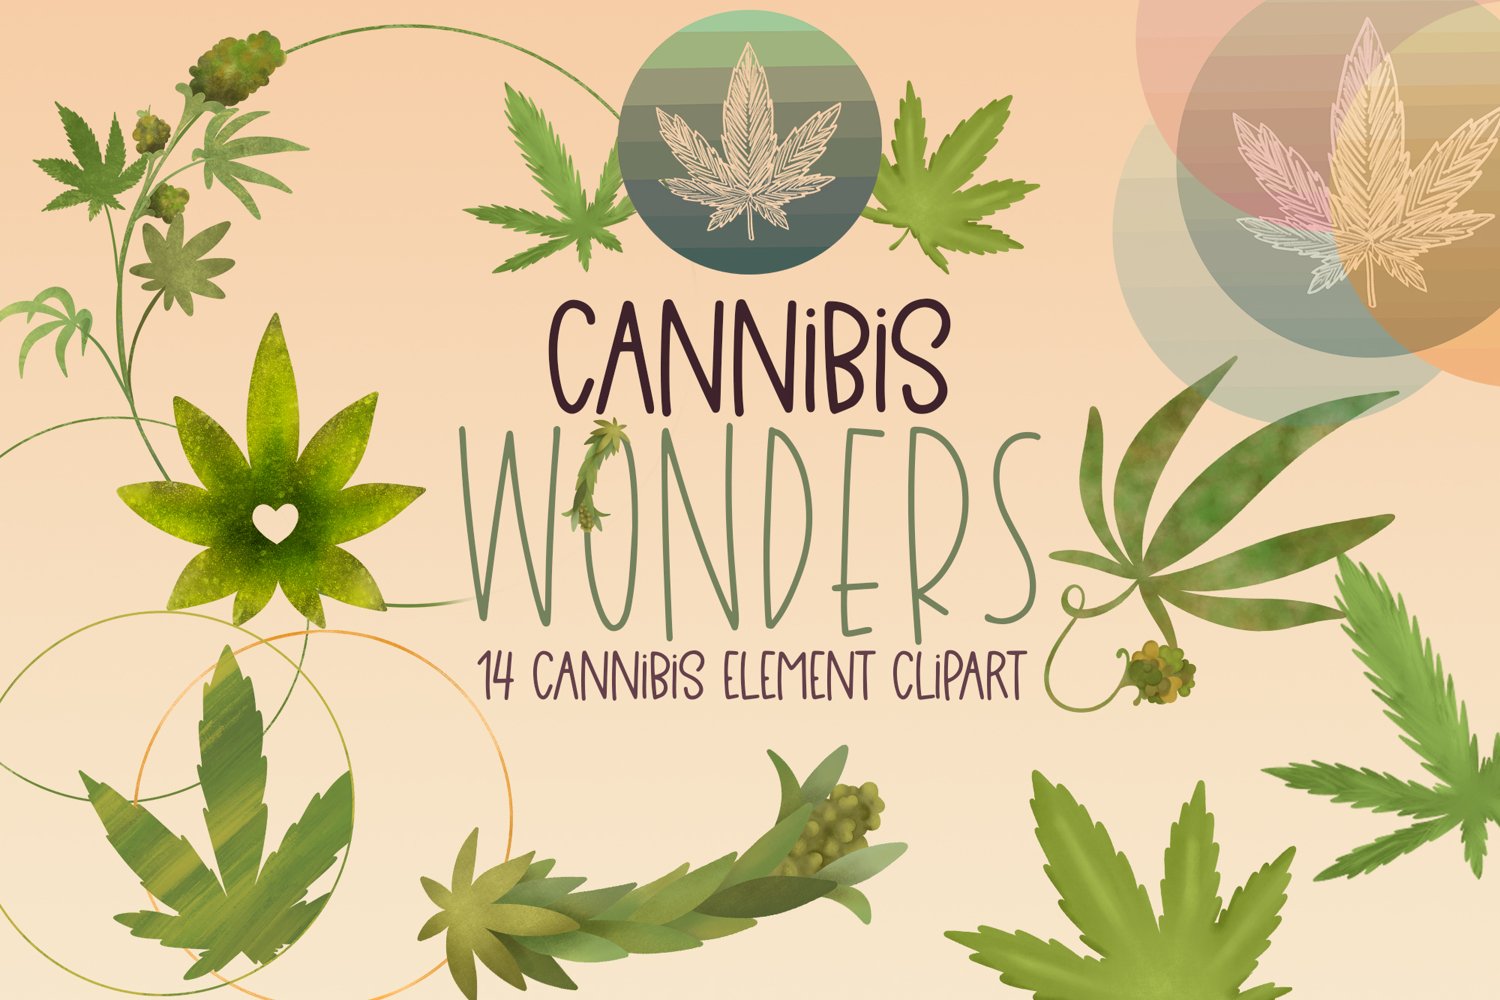 Cover images of Cannibis Inspired Element Clipart.